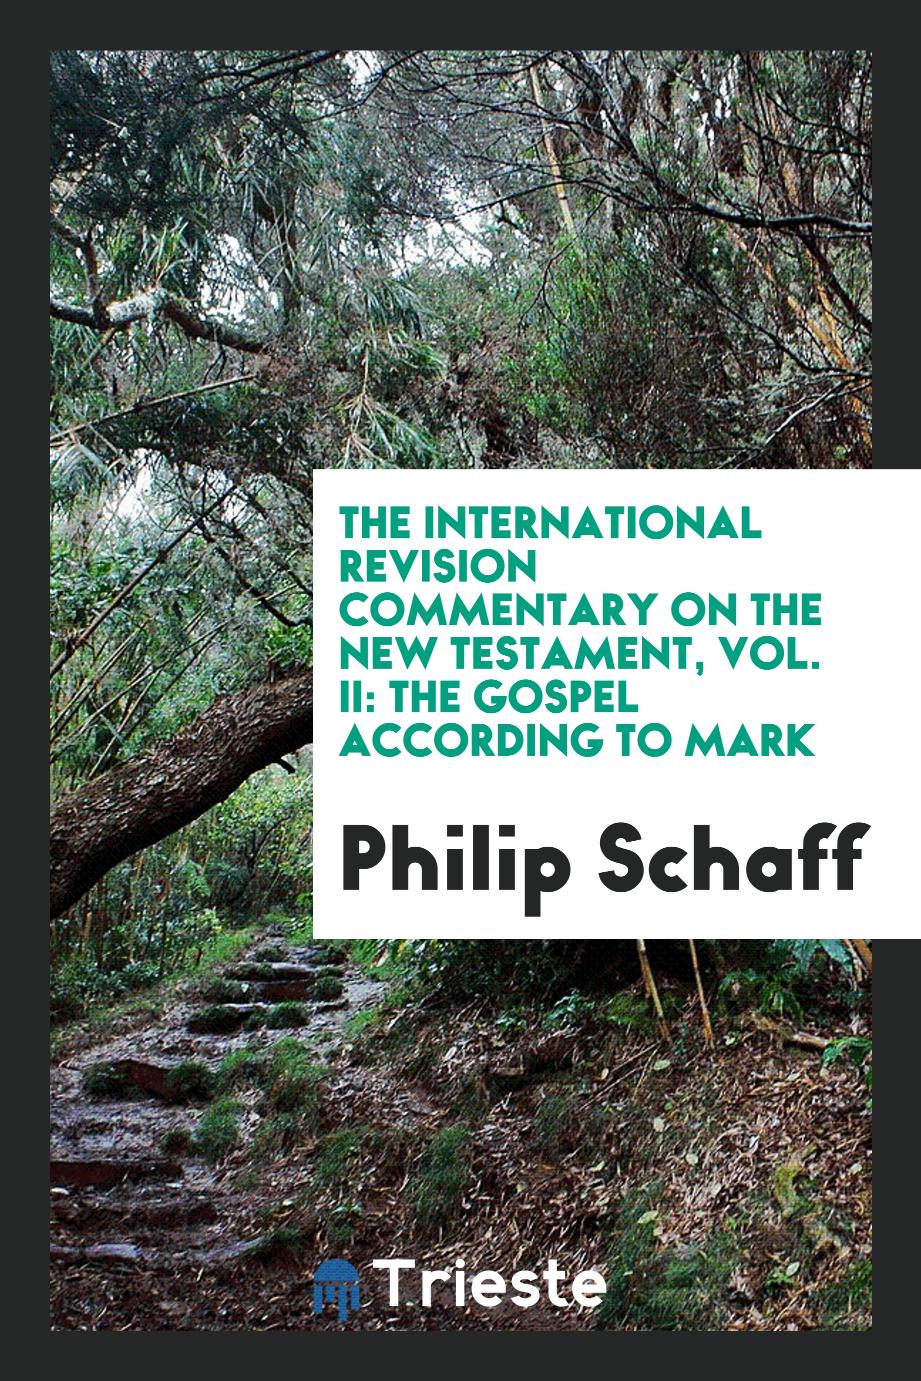 The international revision commentary on the new testament, Vol. II: The Gospel according to Mark